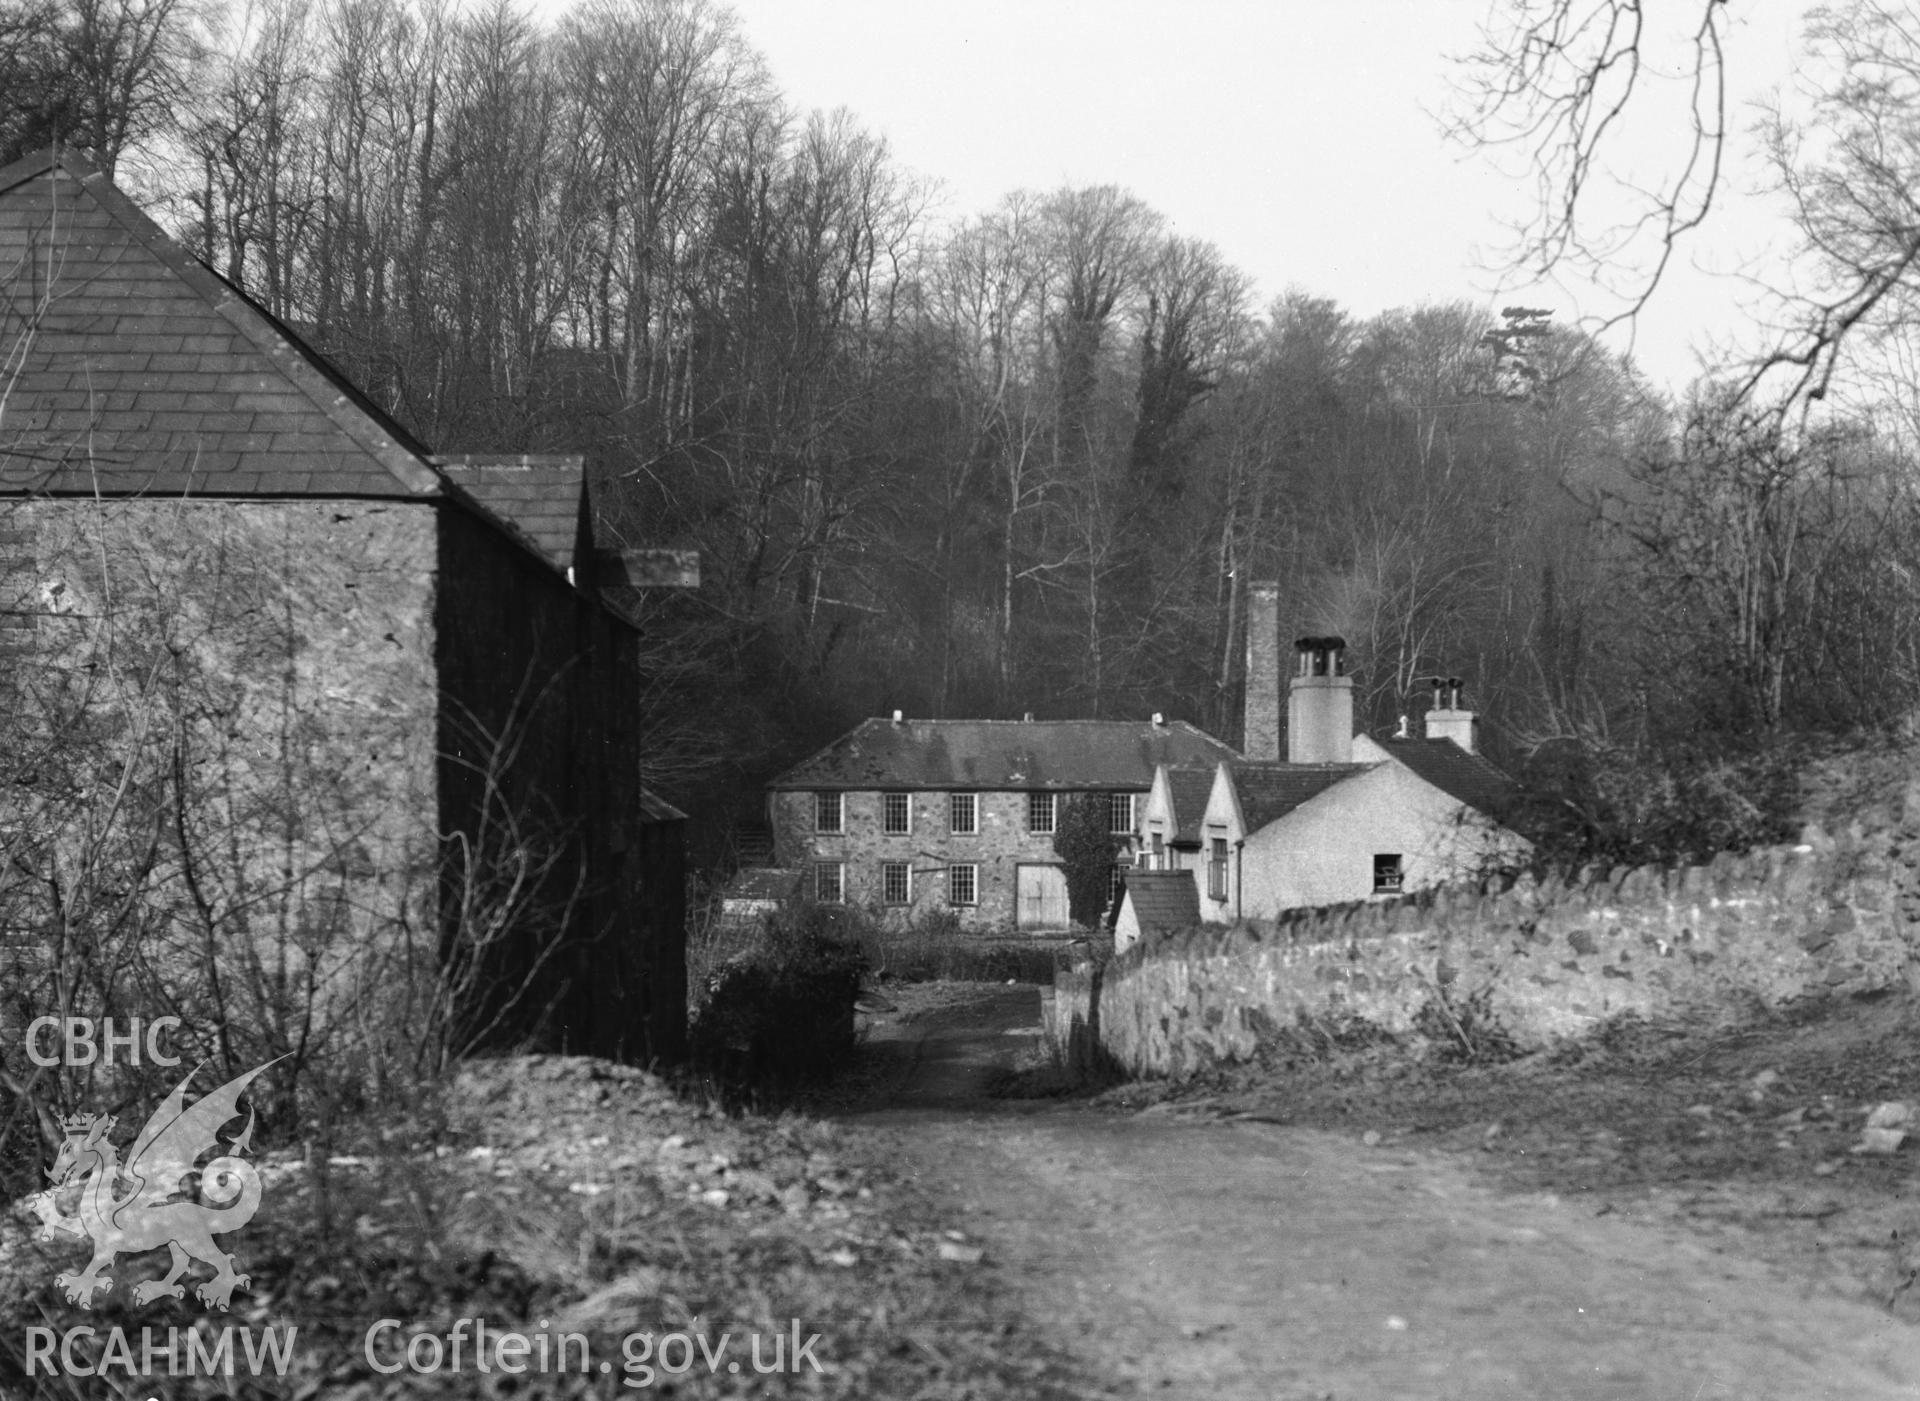 Digitised copy of a black and white negative showing Cadnant Woollen Mill, produced by RCAHMW, before 1960.